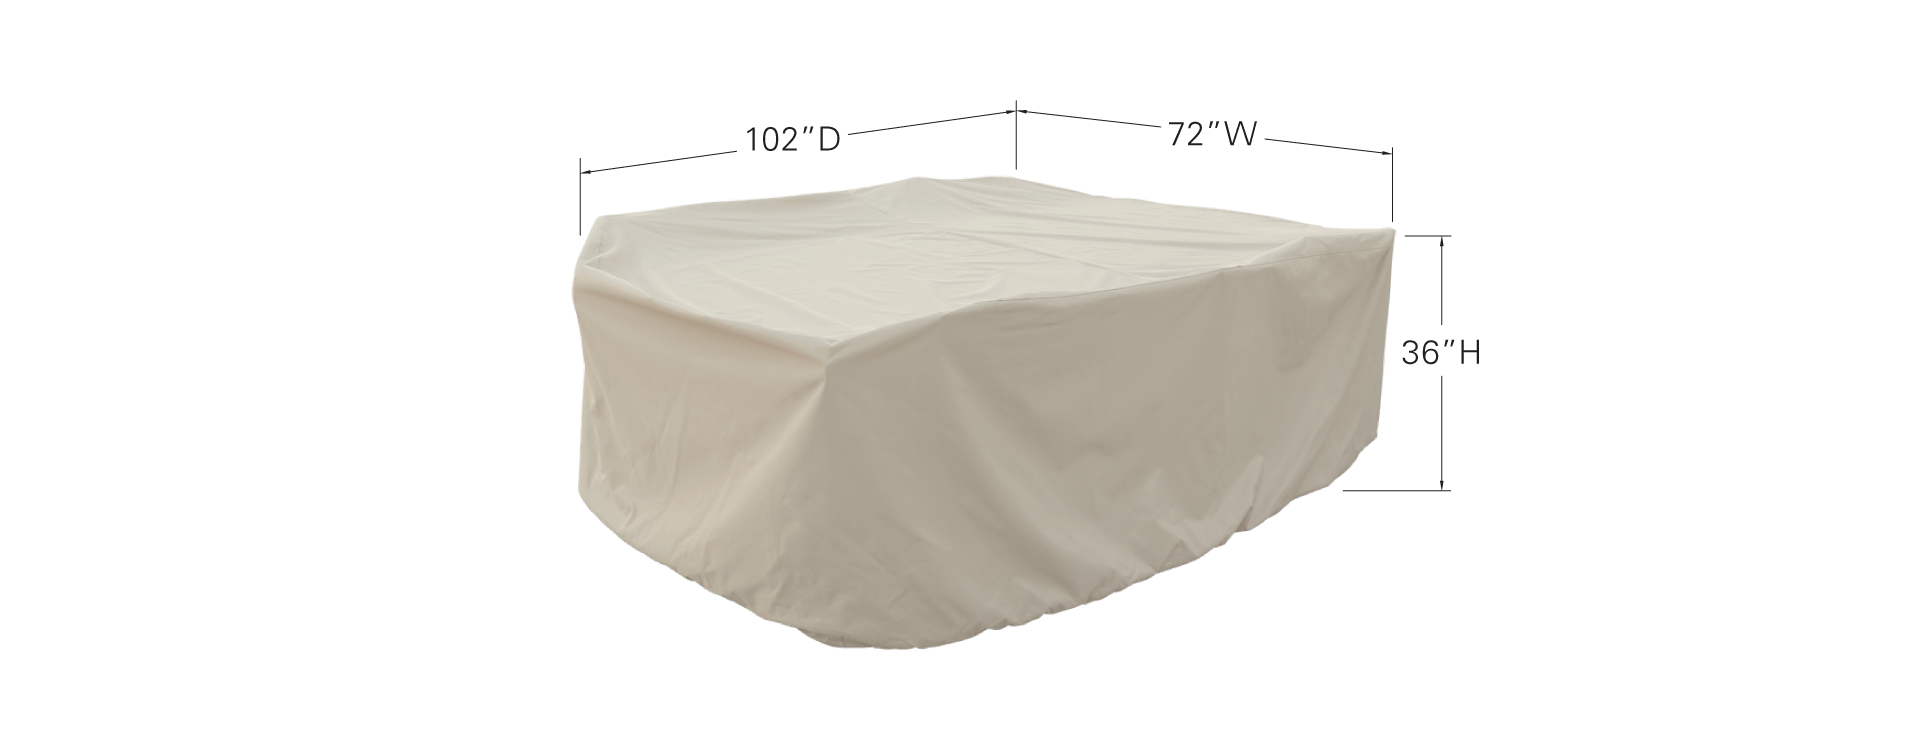 Medium Oval/Rectangle Table & Chairs Protective Cover